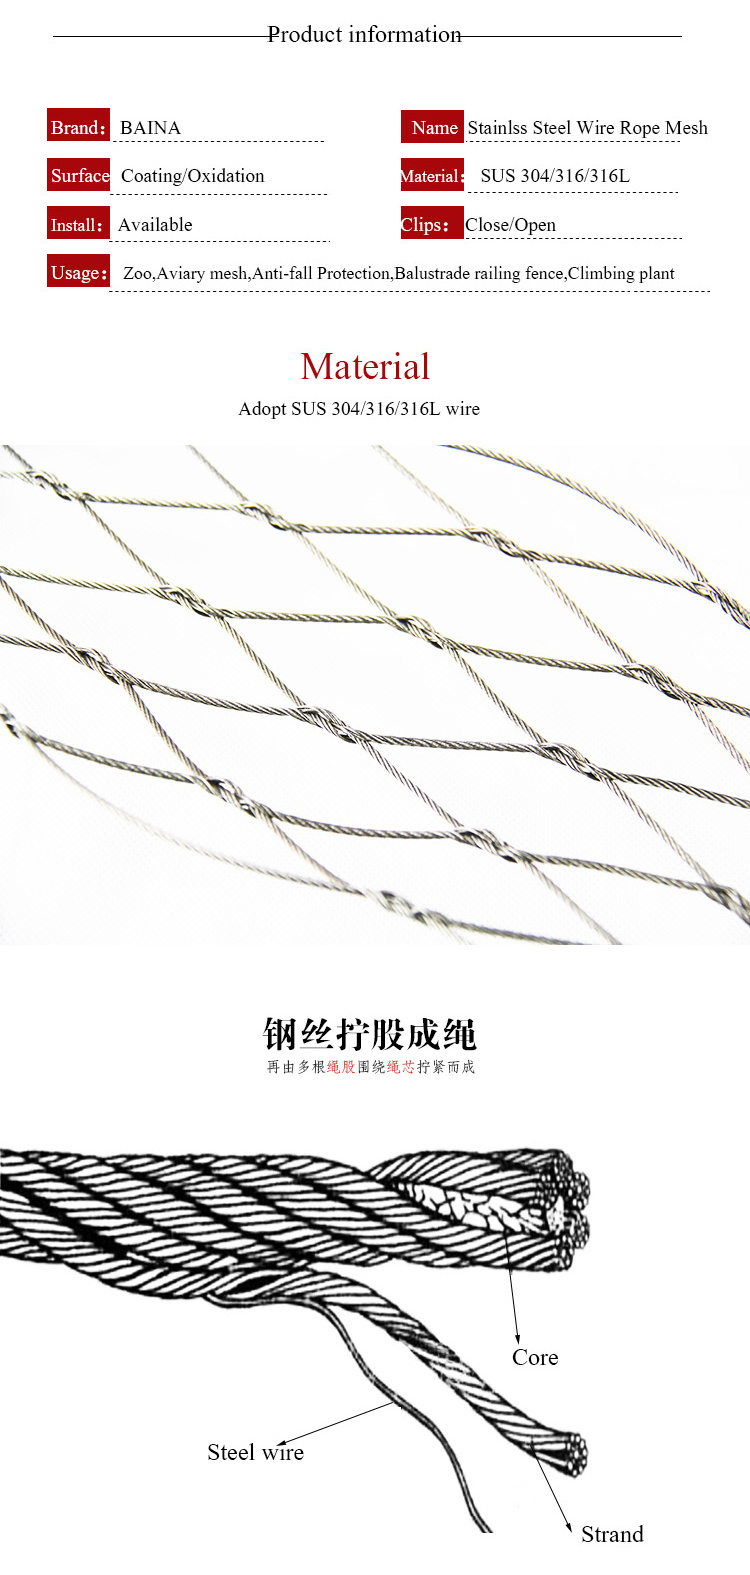 Stainless Steel Wrie Rope Mesh Net / Stainless Steel Rope Mesh / SS304 Rope Mesh Fence